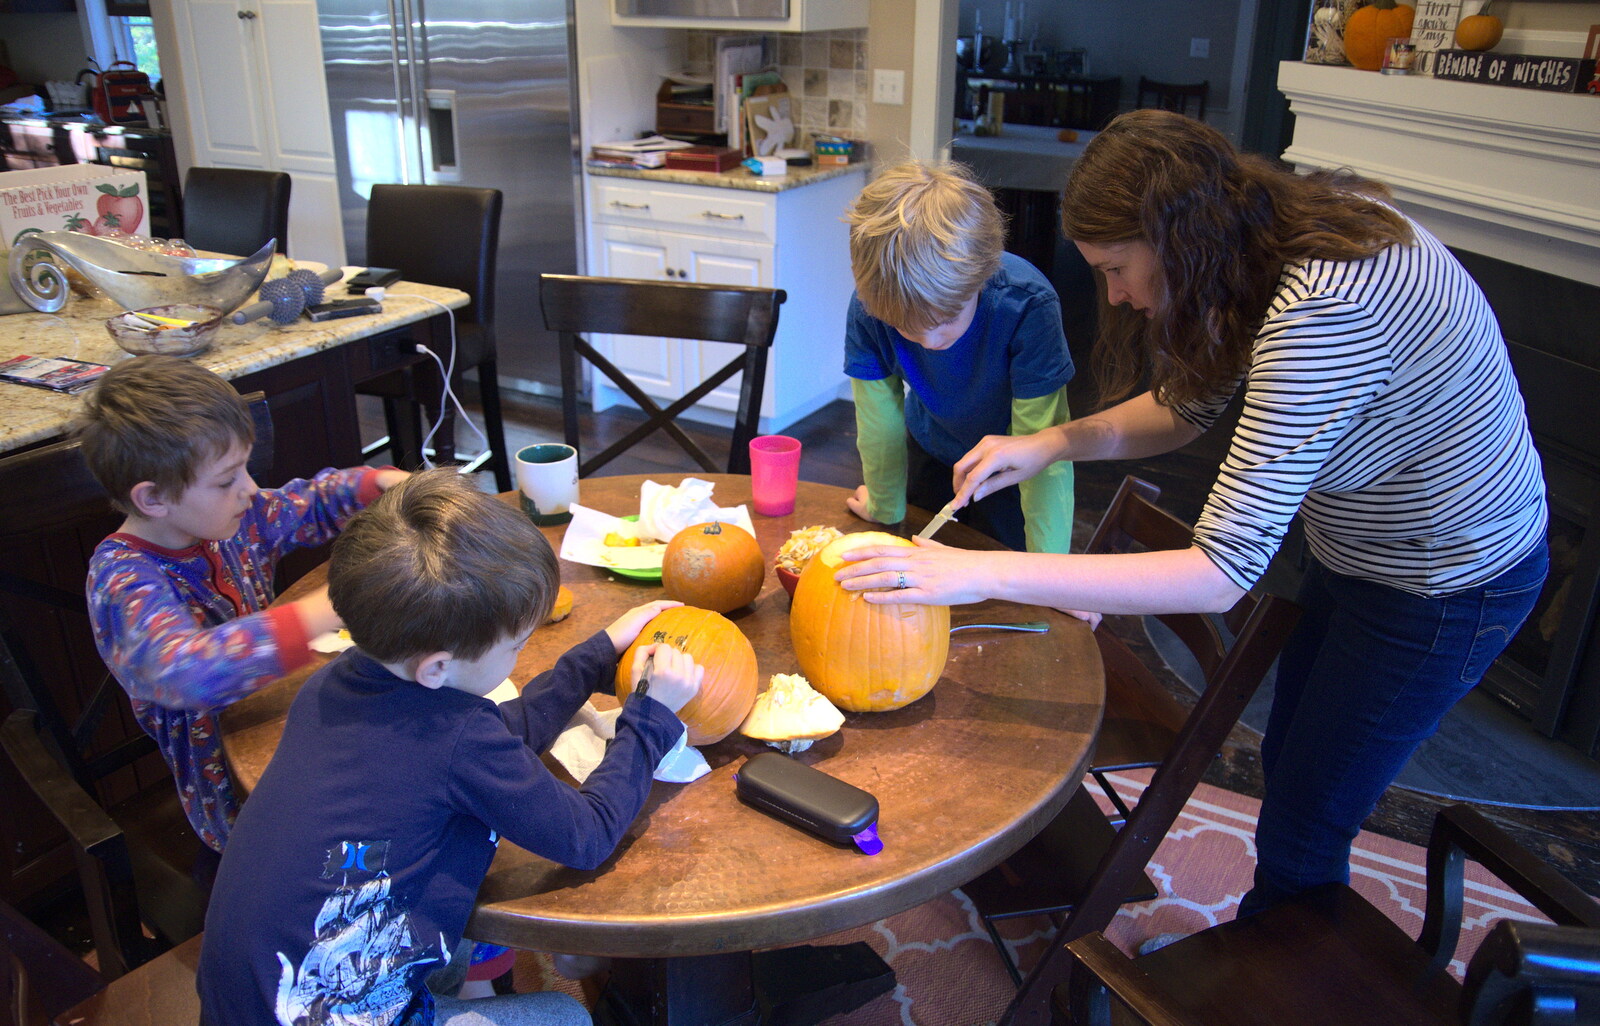 It's a family pumpkin carving session from Pumpkin Picking at Alstede Farm, Chester, Morris County, New Jersey - 24th October 2018